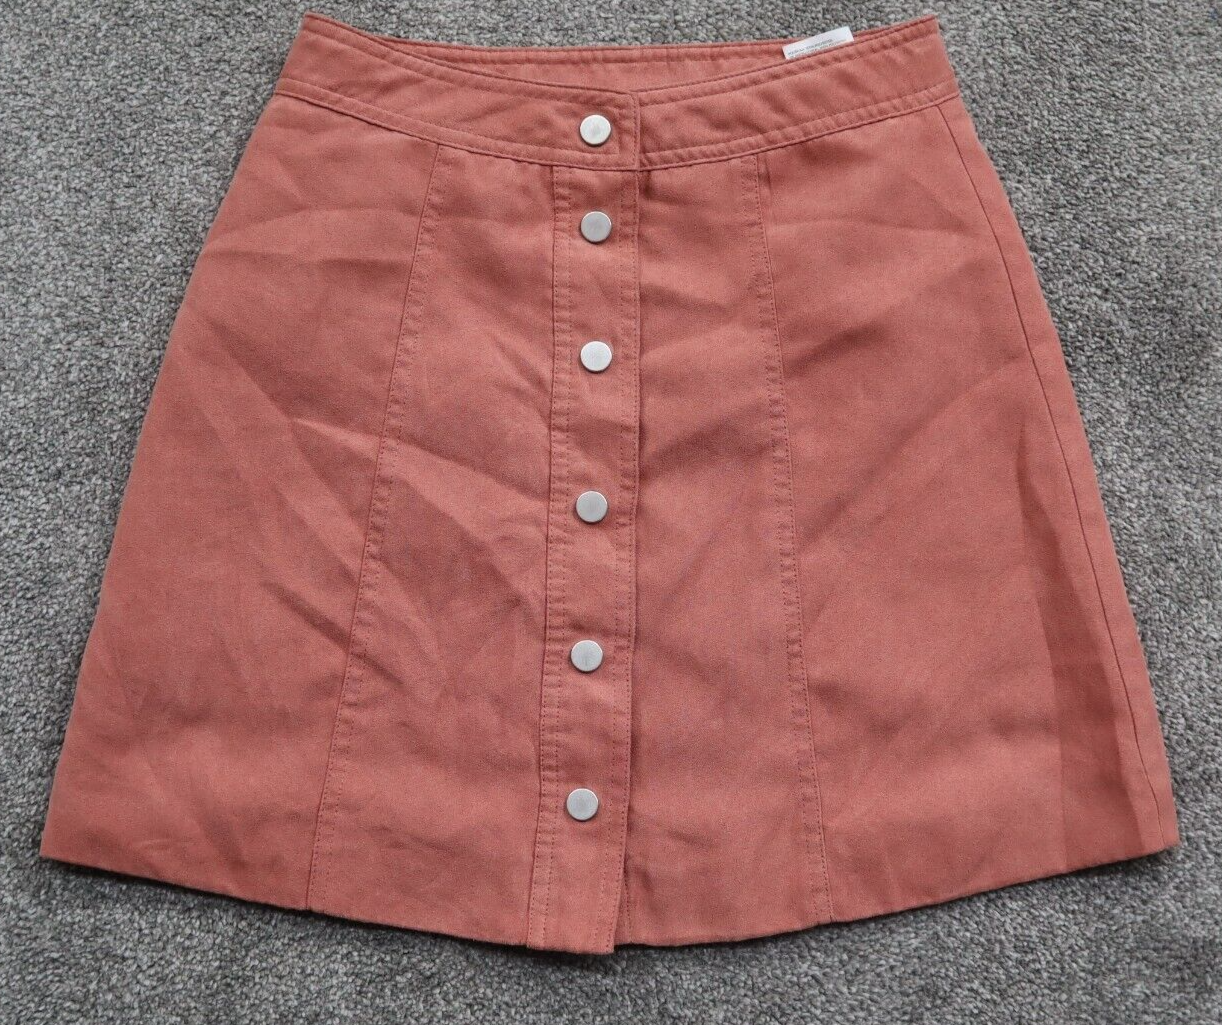 H&M Womens Super Stretch A Line Mini Skirts Mid Rise Snap Button Coral Size 2